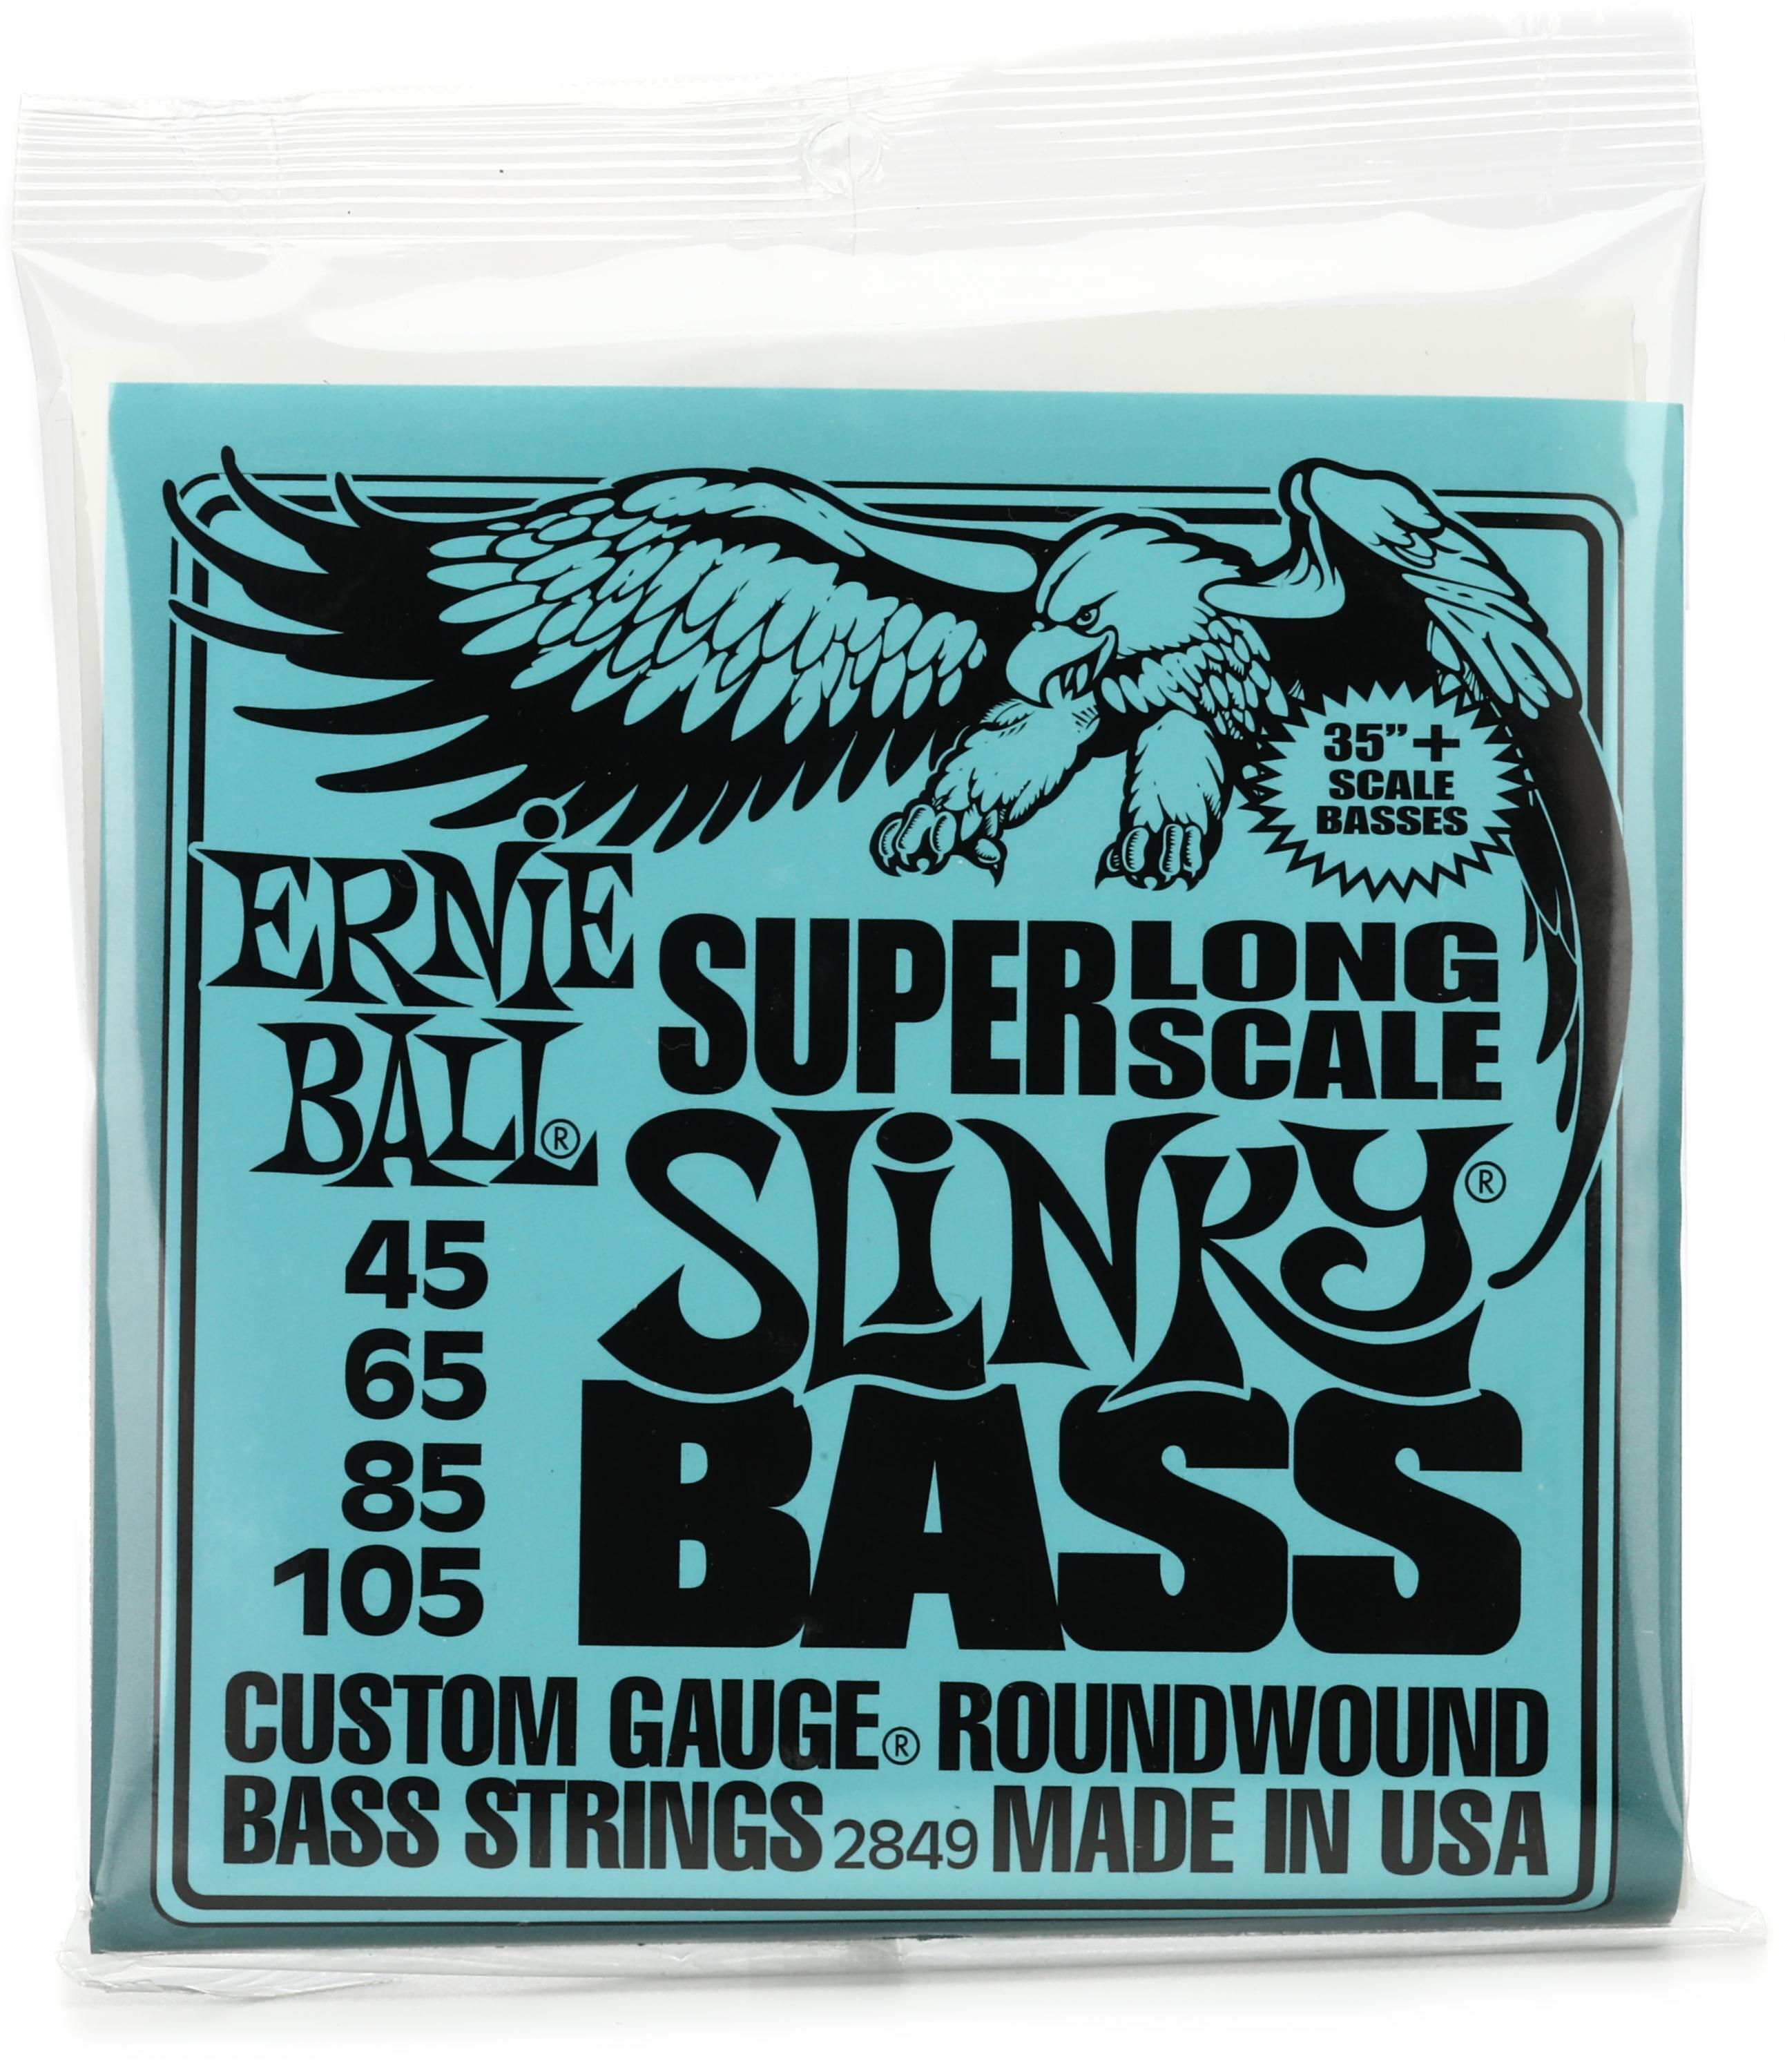 Ernie Ball 2849 Super Slinky Nickel Wound Electric Bass Guitar Strings -  .045-.105 Long Scale